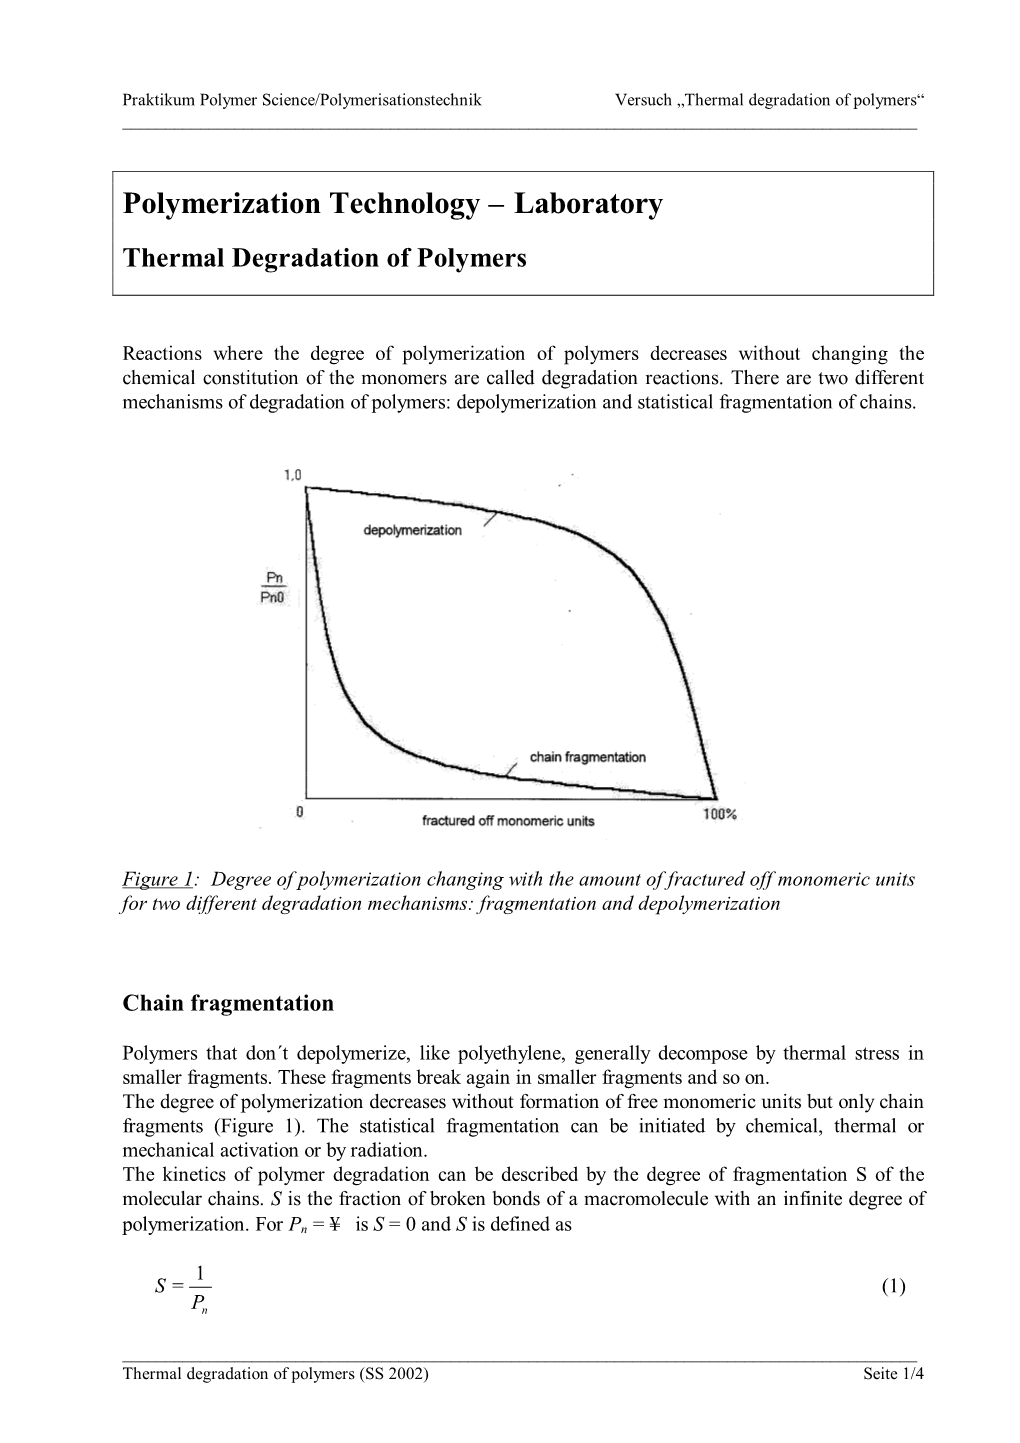 Thermal Degradation of Polymers“ ______